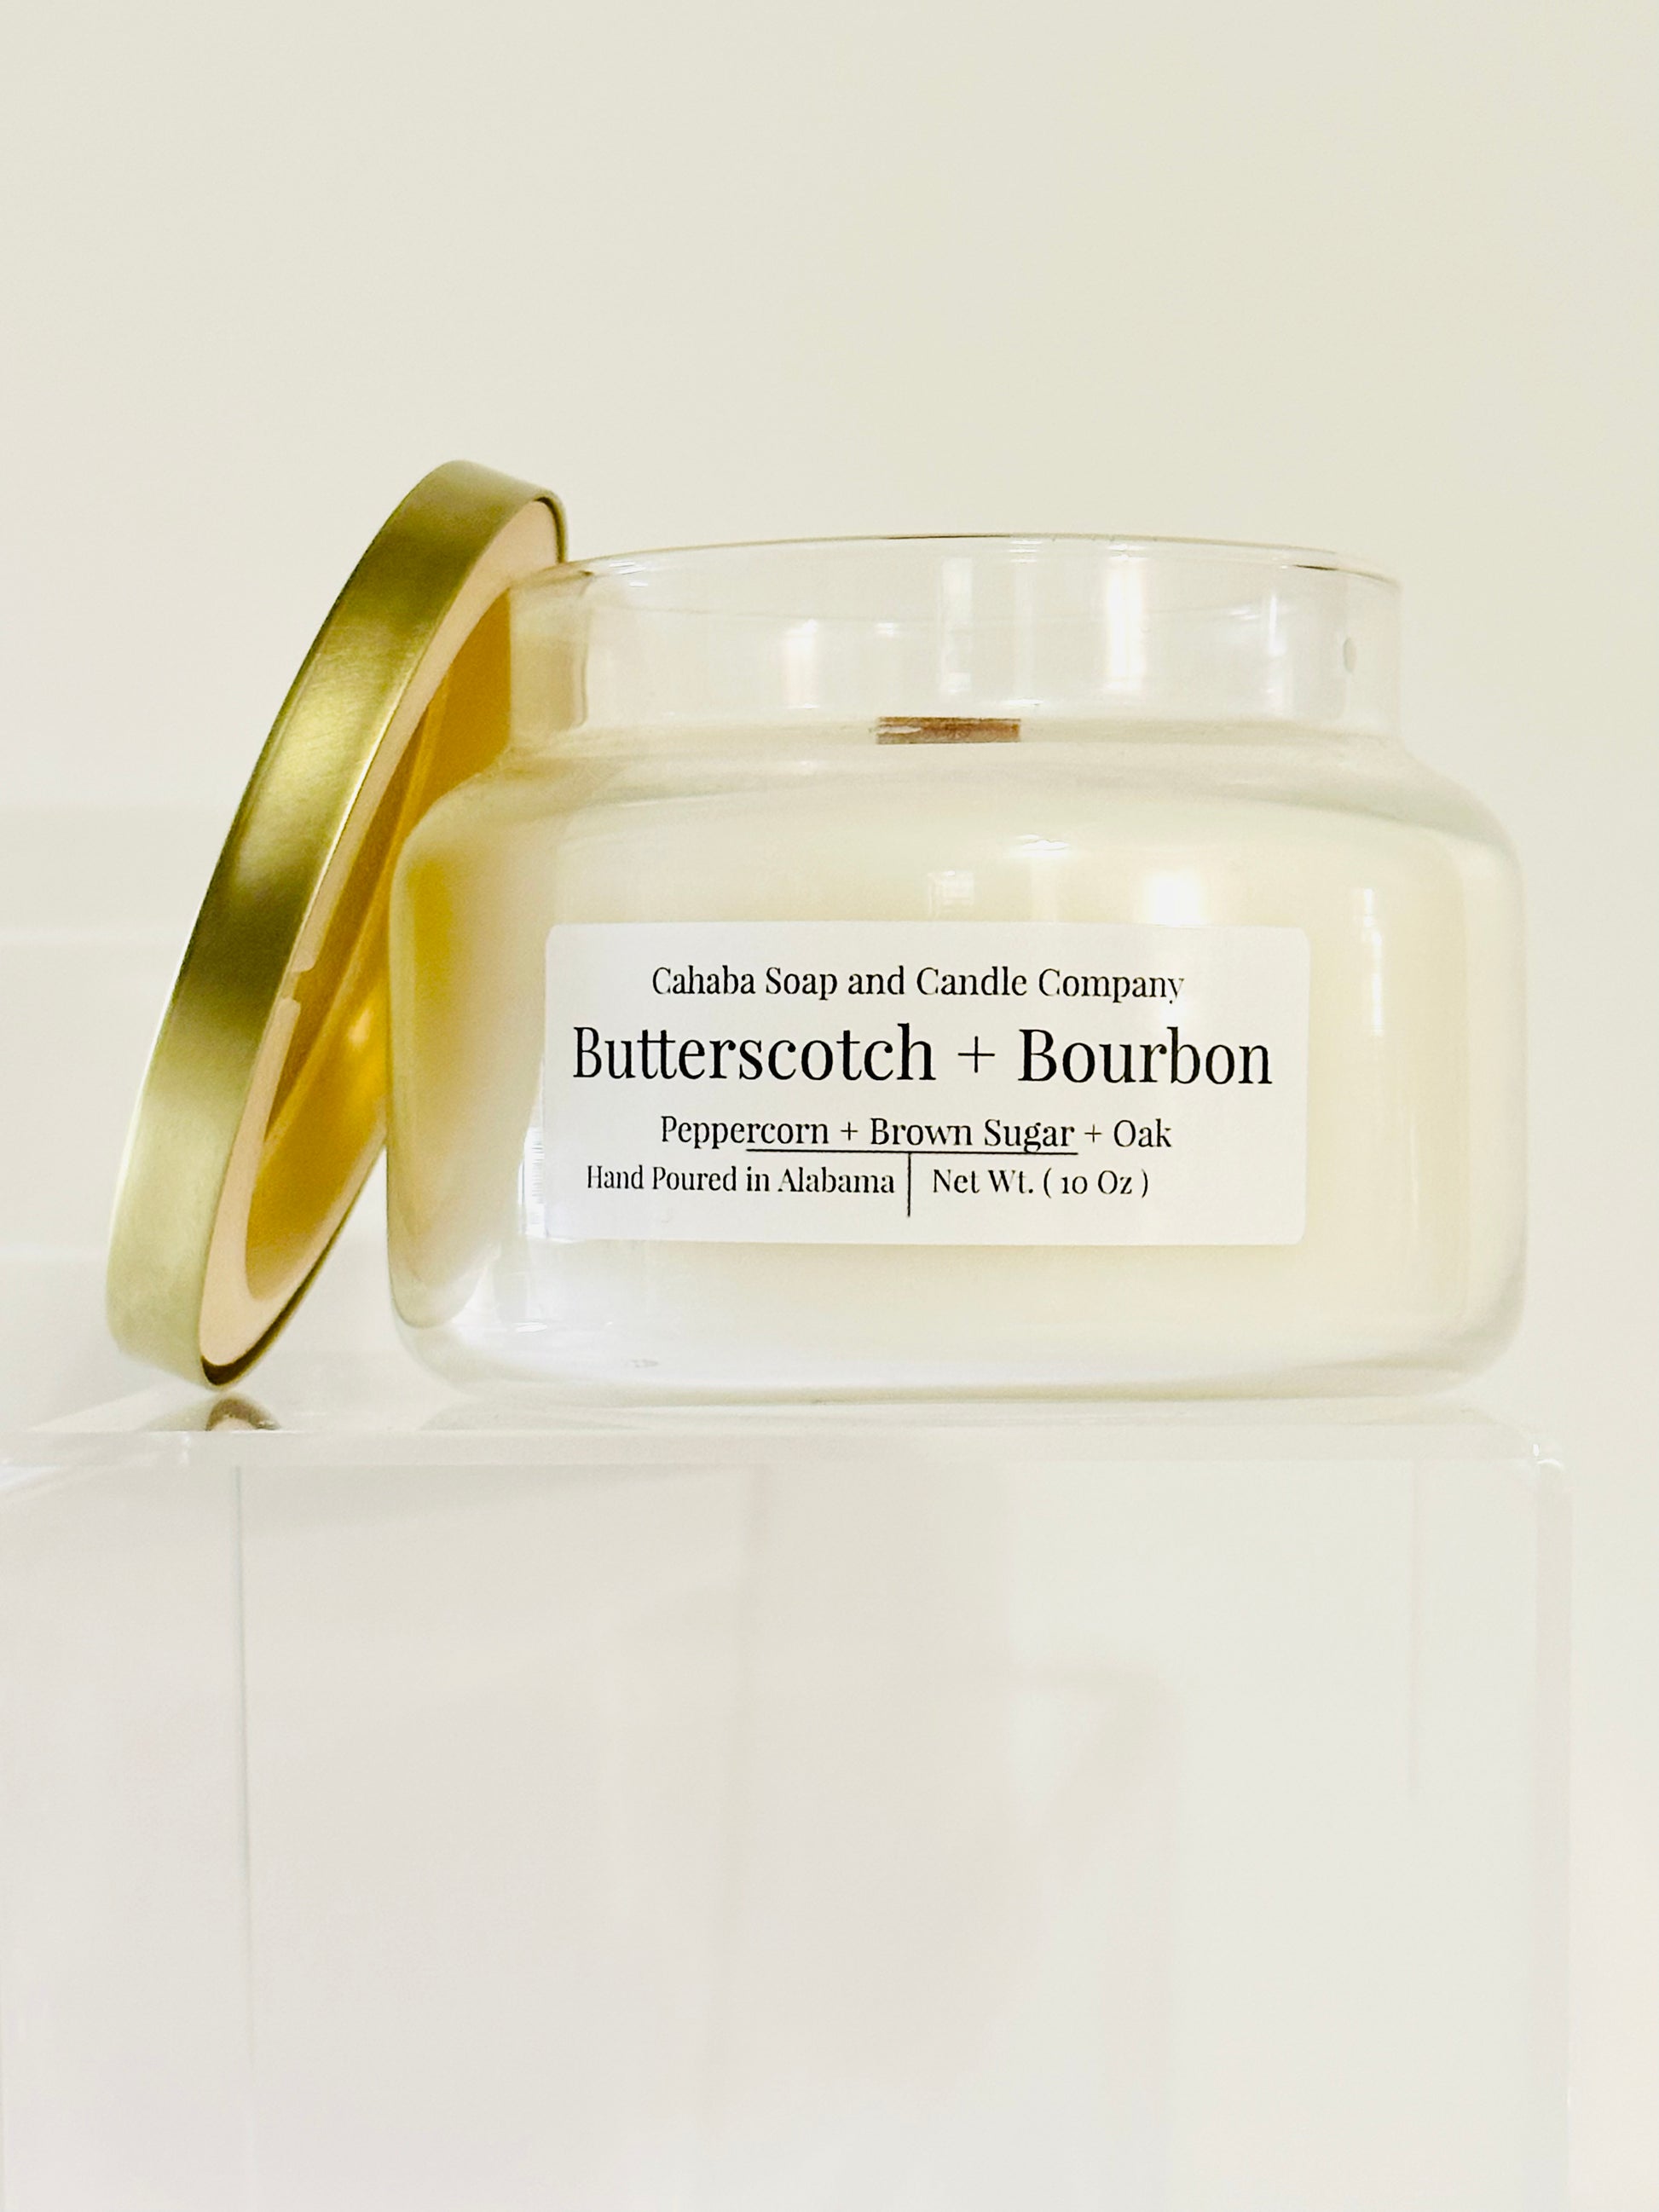 Butterscotch + Bourbon - Cahaba Soap and Candle Company